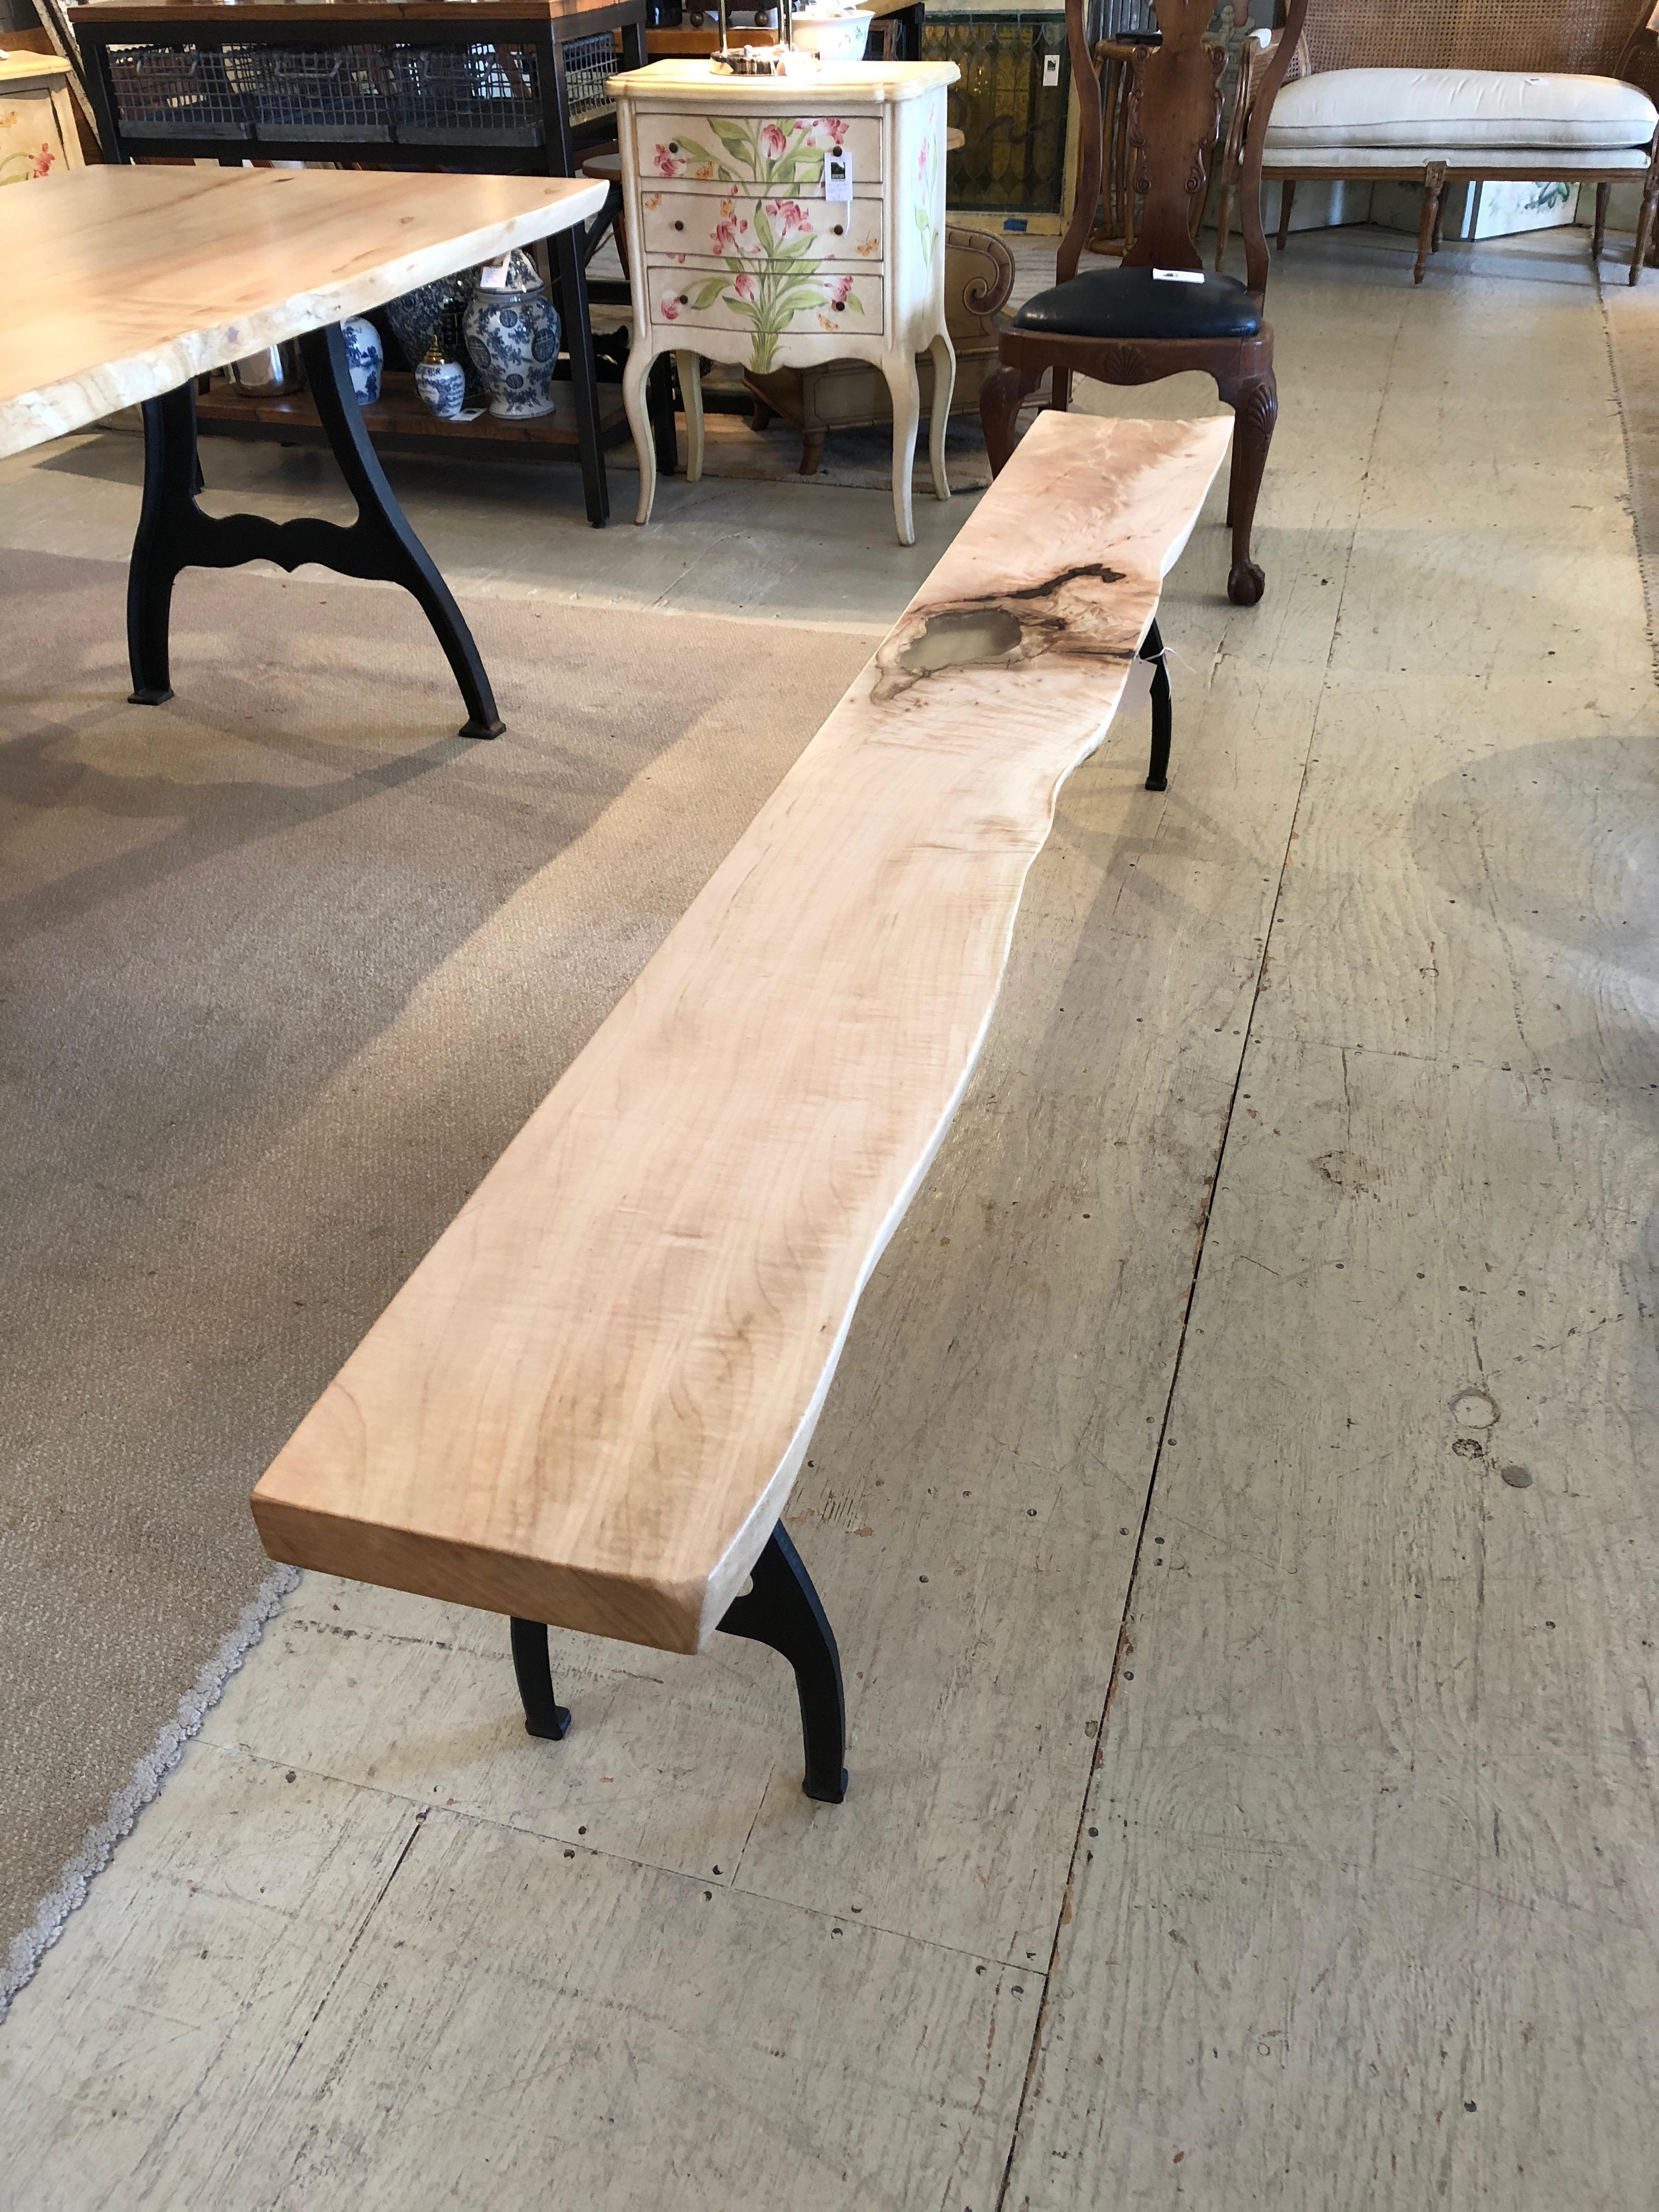 Gorgeously crafted long bench in a lovely light shade of solid maple having live edges, filled in one area with clear resin, and paired with iron industrial legs.

Note: Matching 7 ft dining table offered. Price upon request.